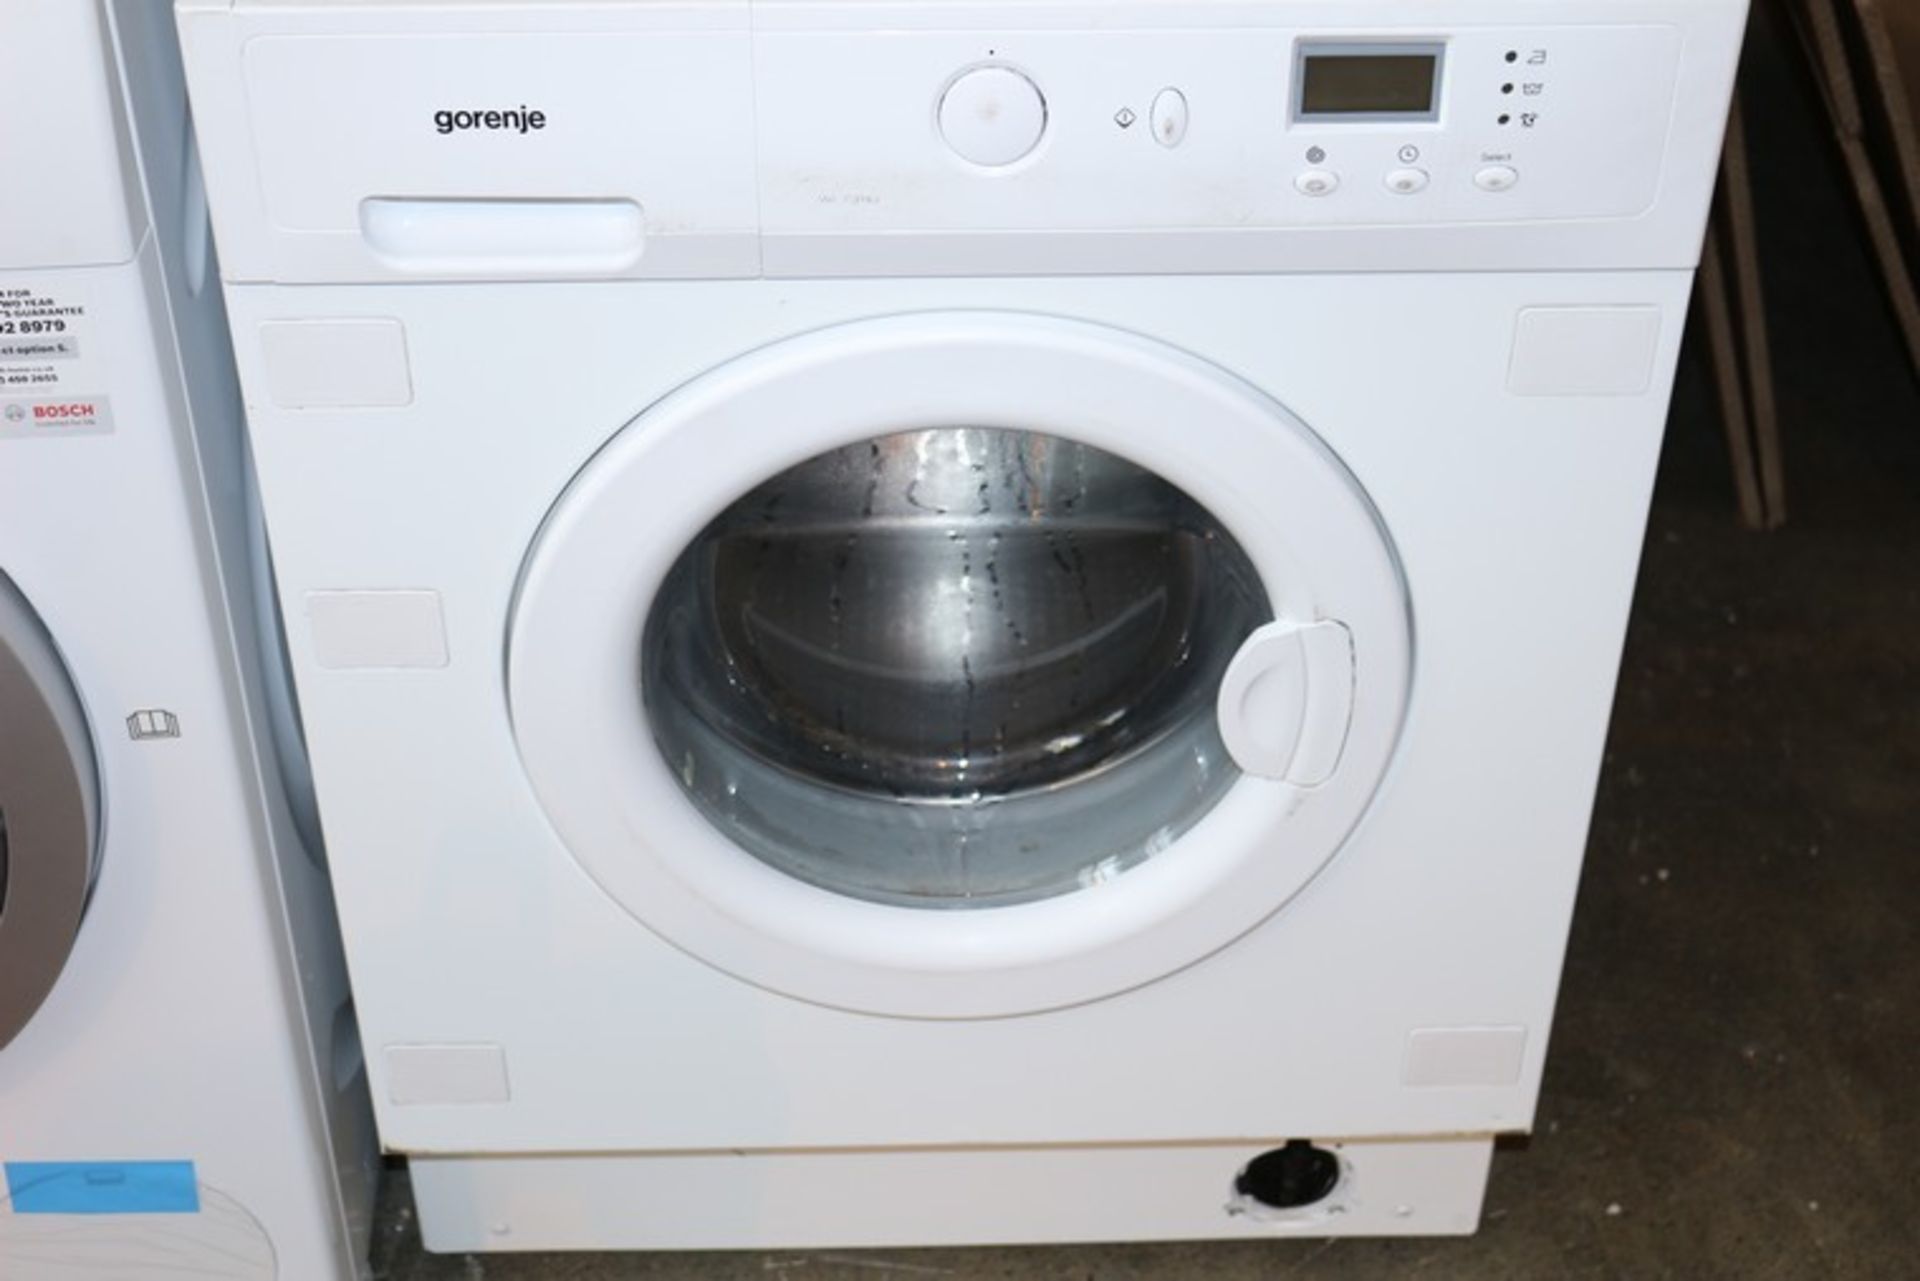 1 x GORENJE WASHING MACHINE IN WHITE (22.6.17) *PLEASE NOTE THAT THE BID PRICE IS MULTIPLIED BY